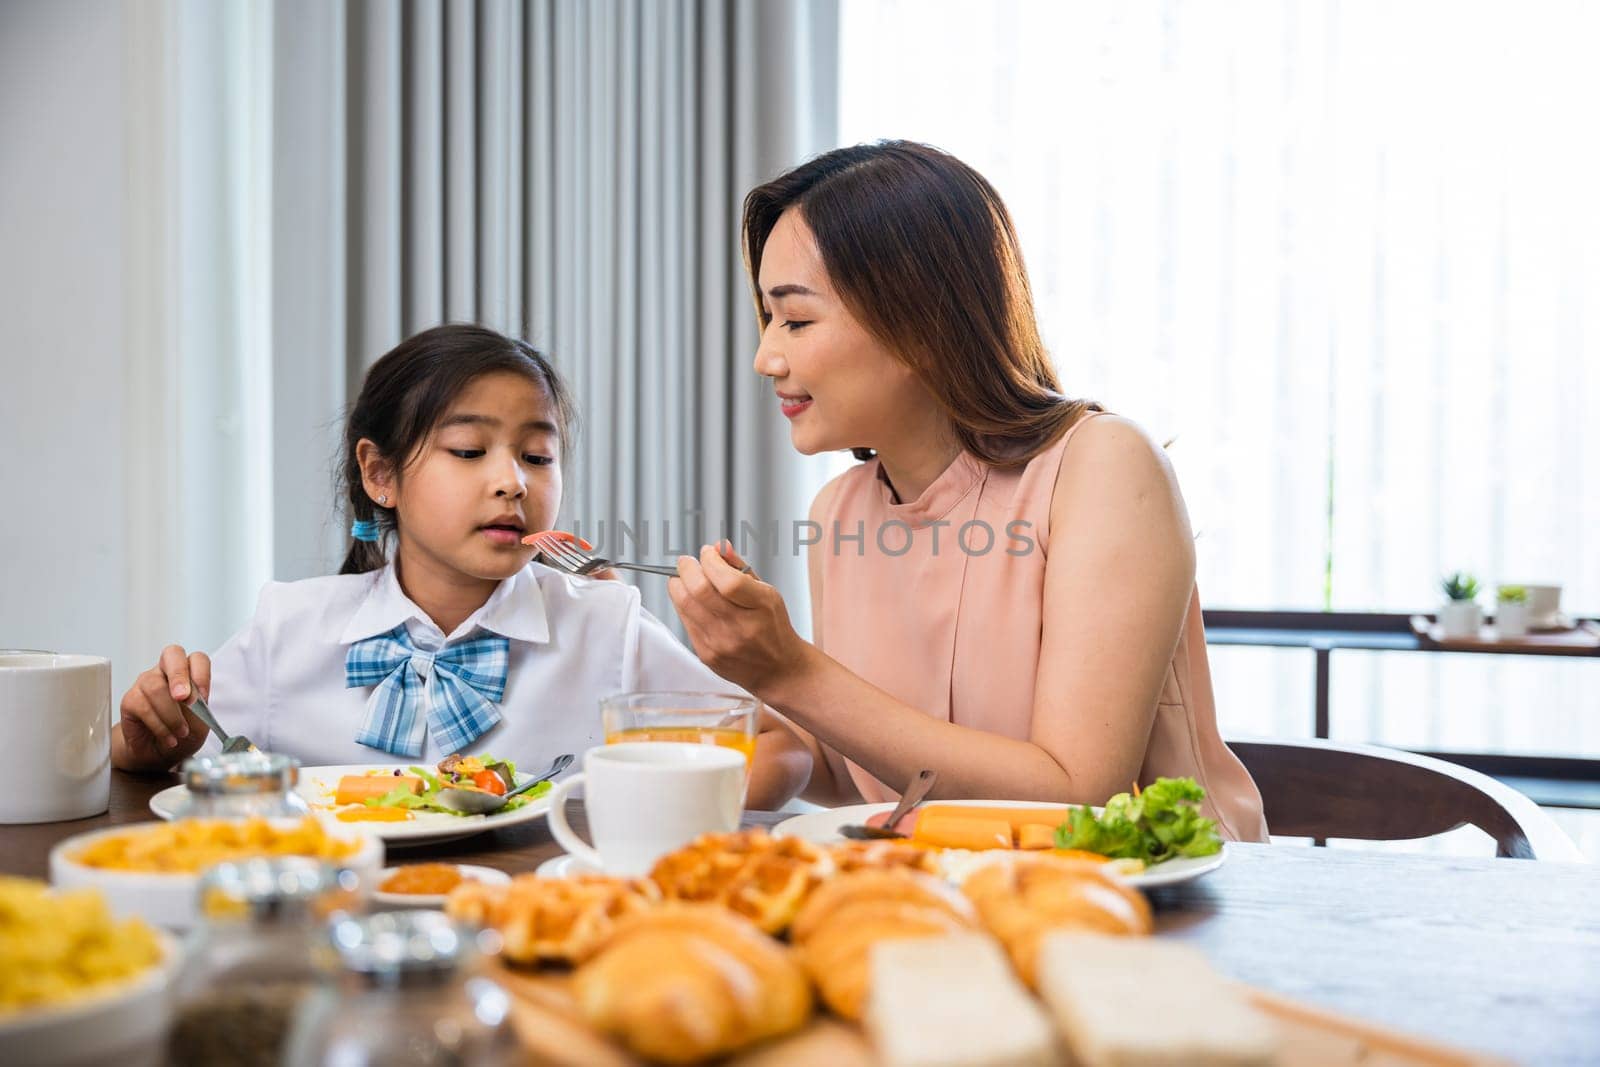 Mom and little preschooler have fun eating meal together by Sorapop